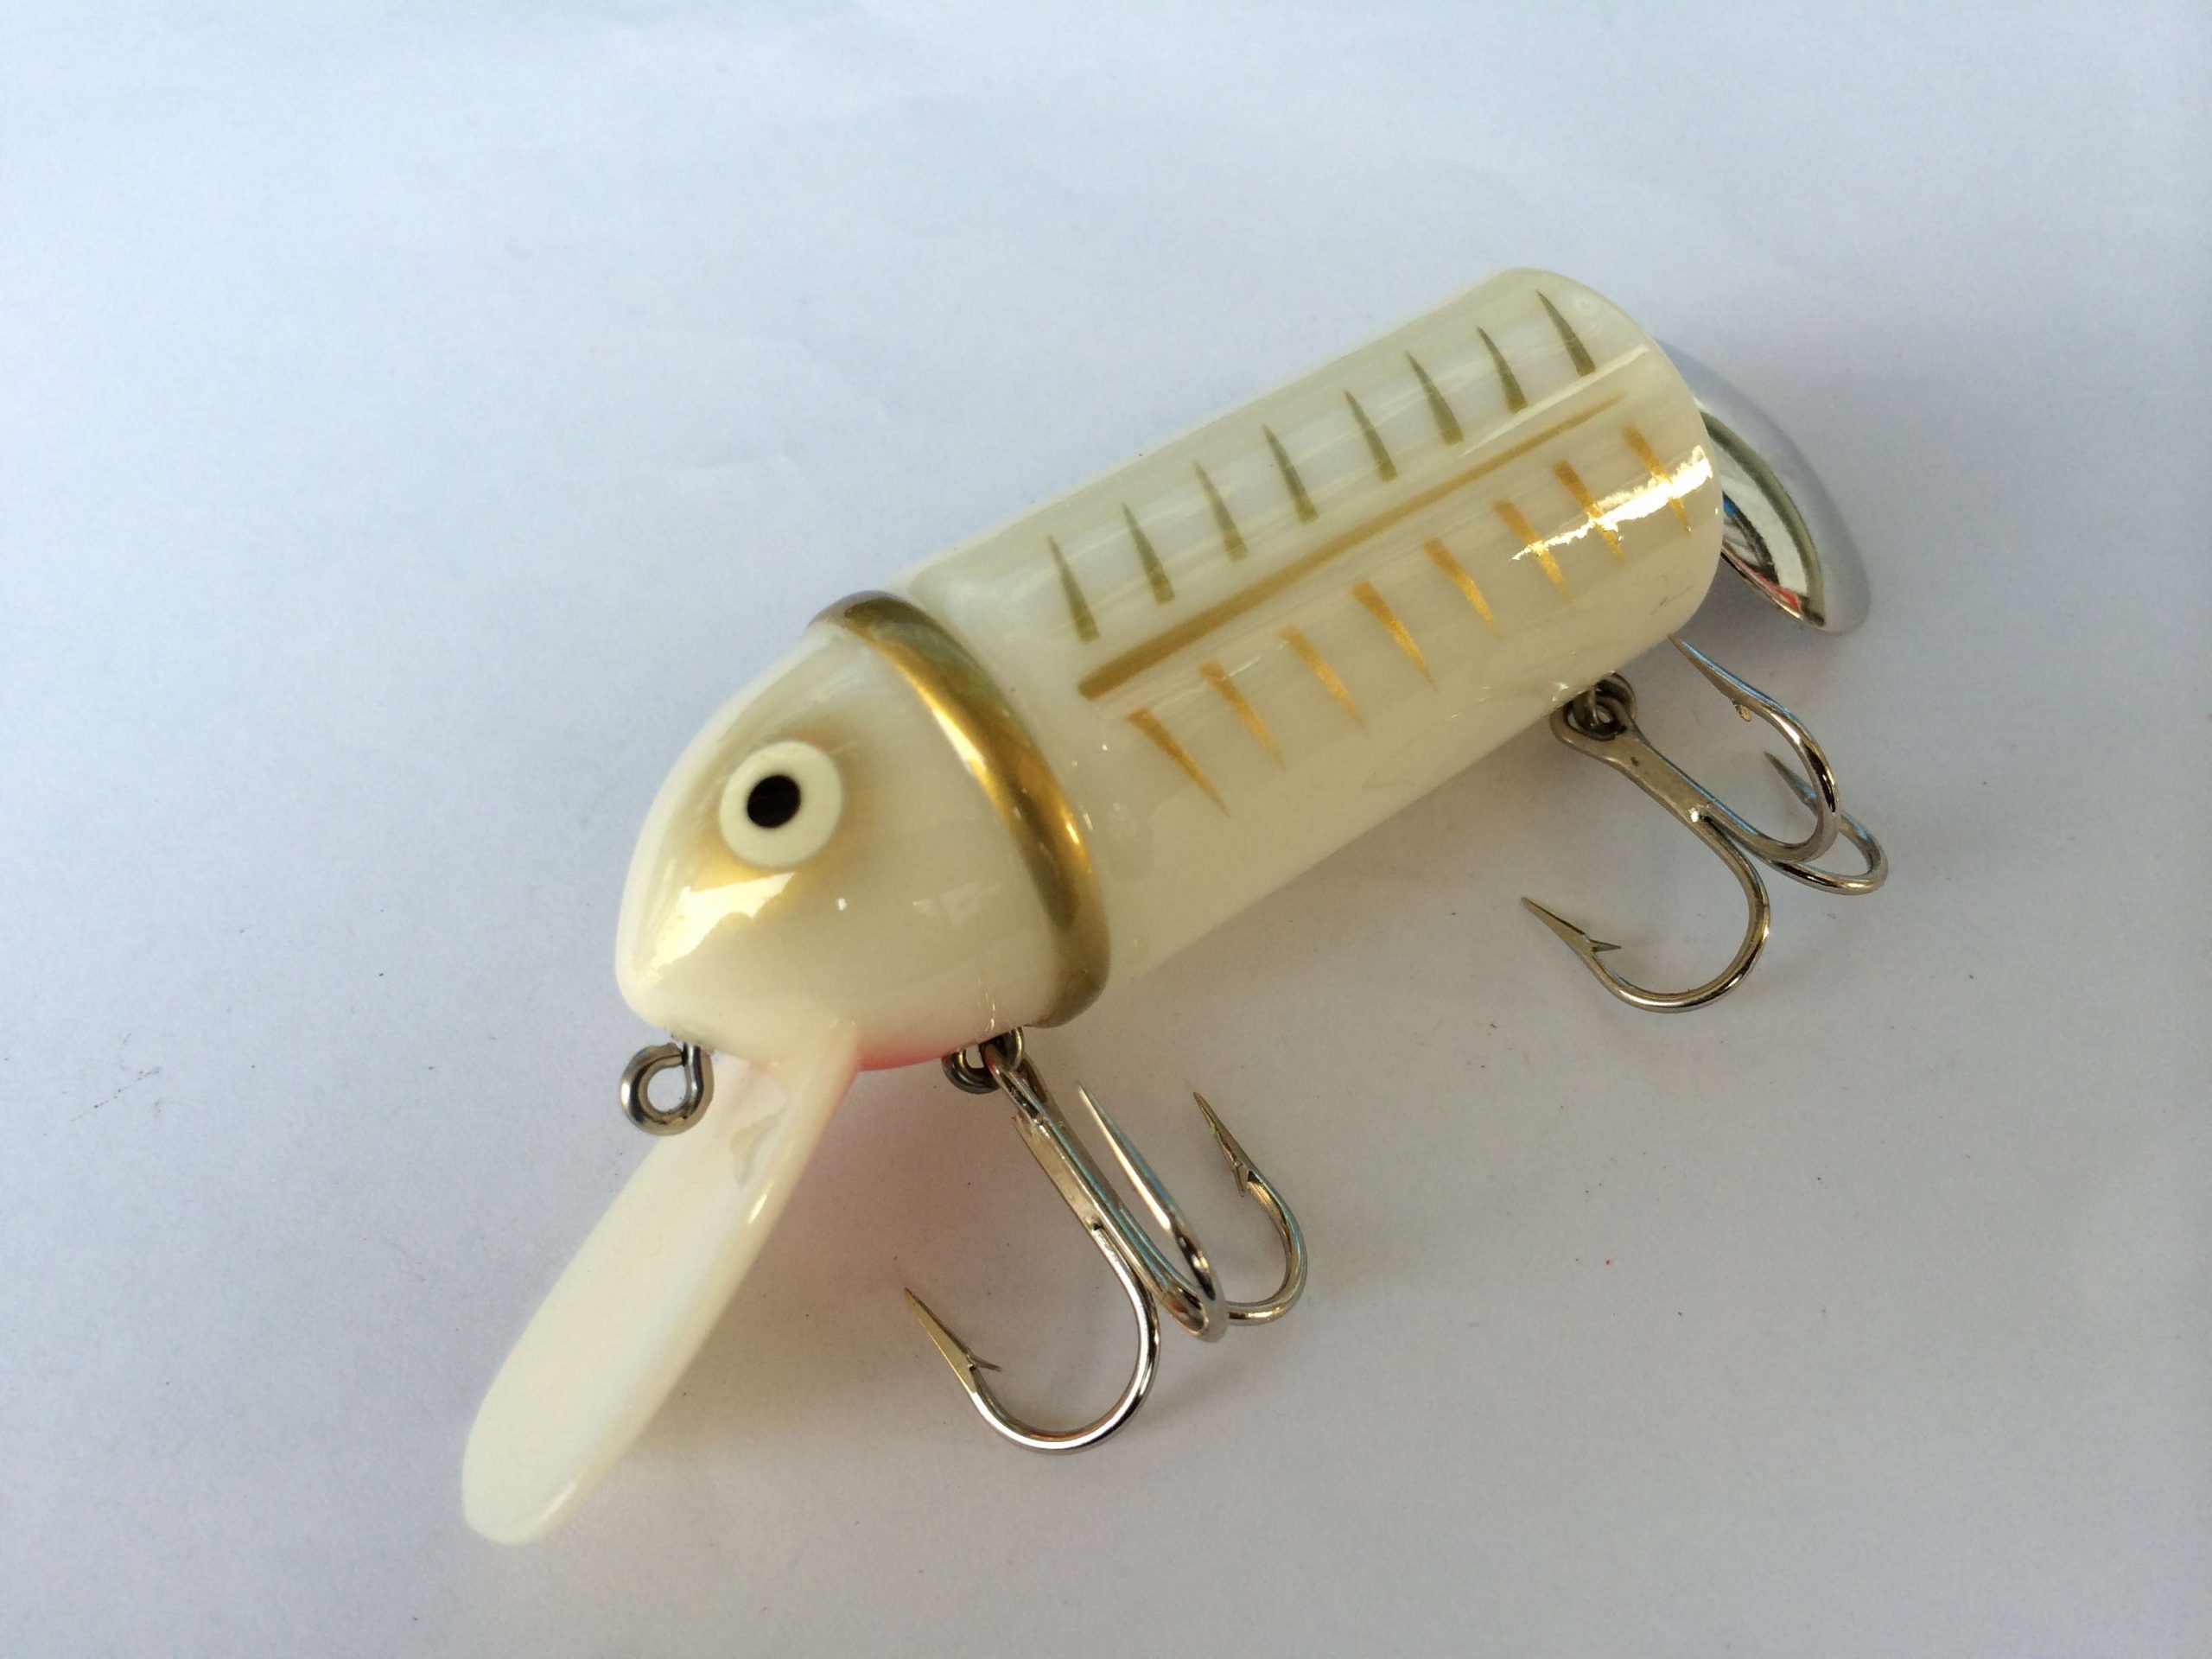 This one has a decent shad appearance with a classic Heddon scheme in gold.